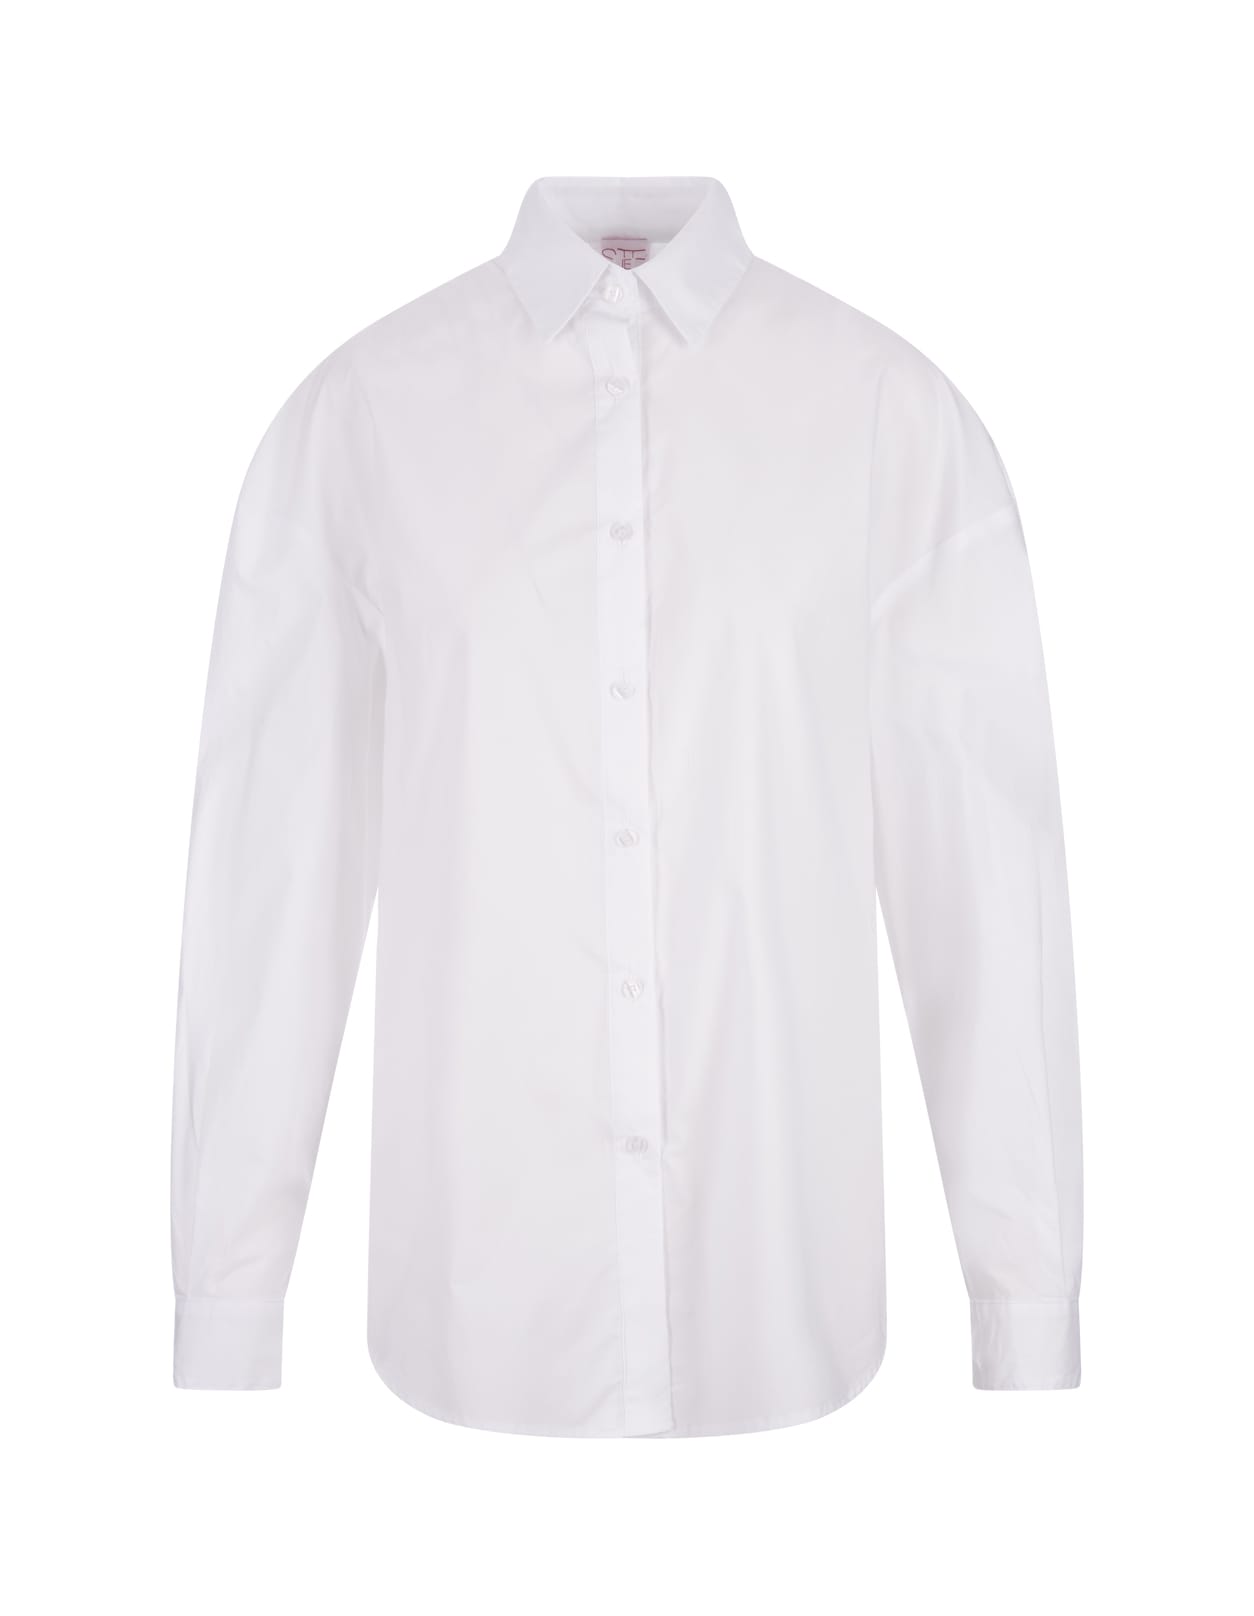 Over Fit Shirt In White Poplin